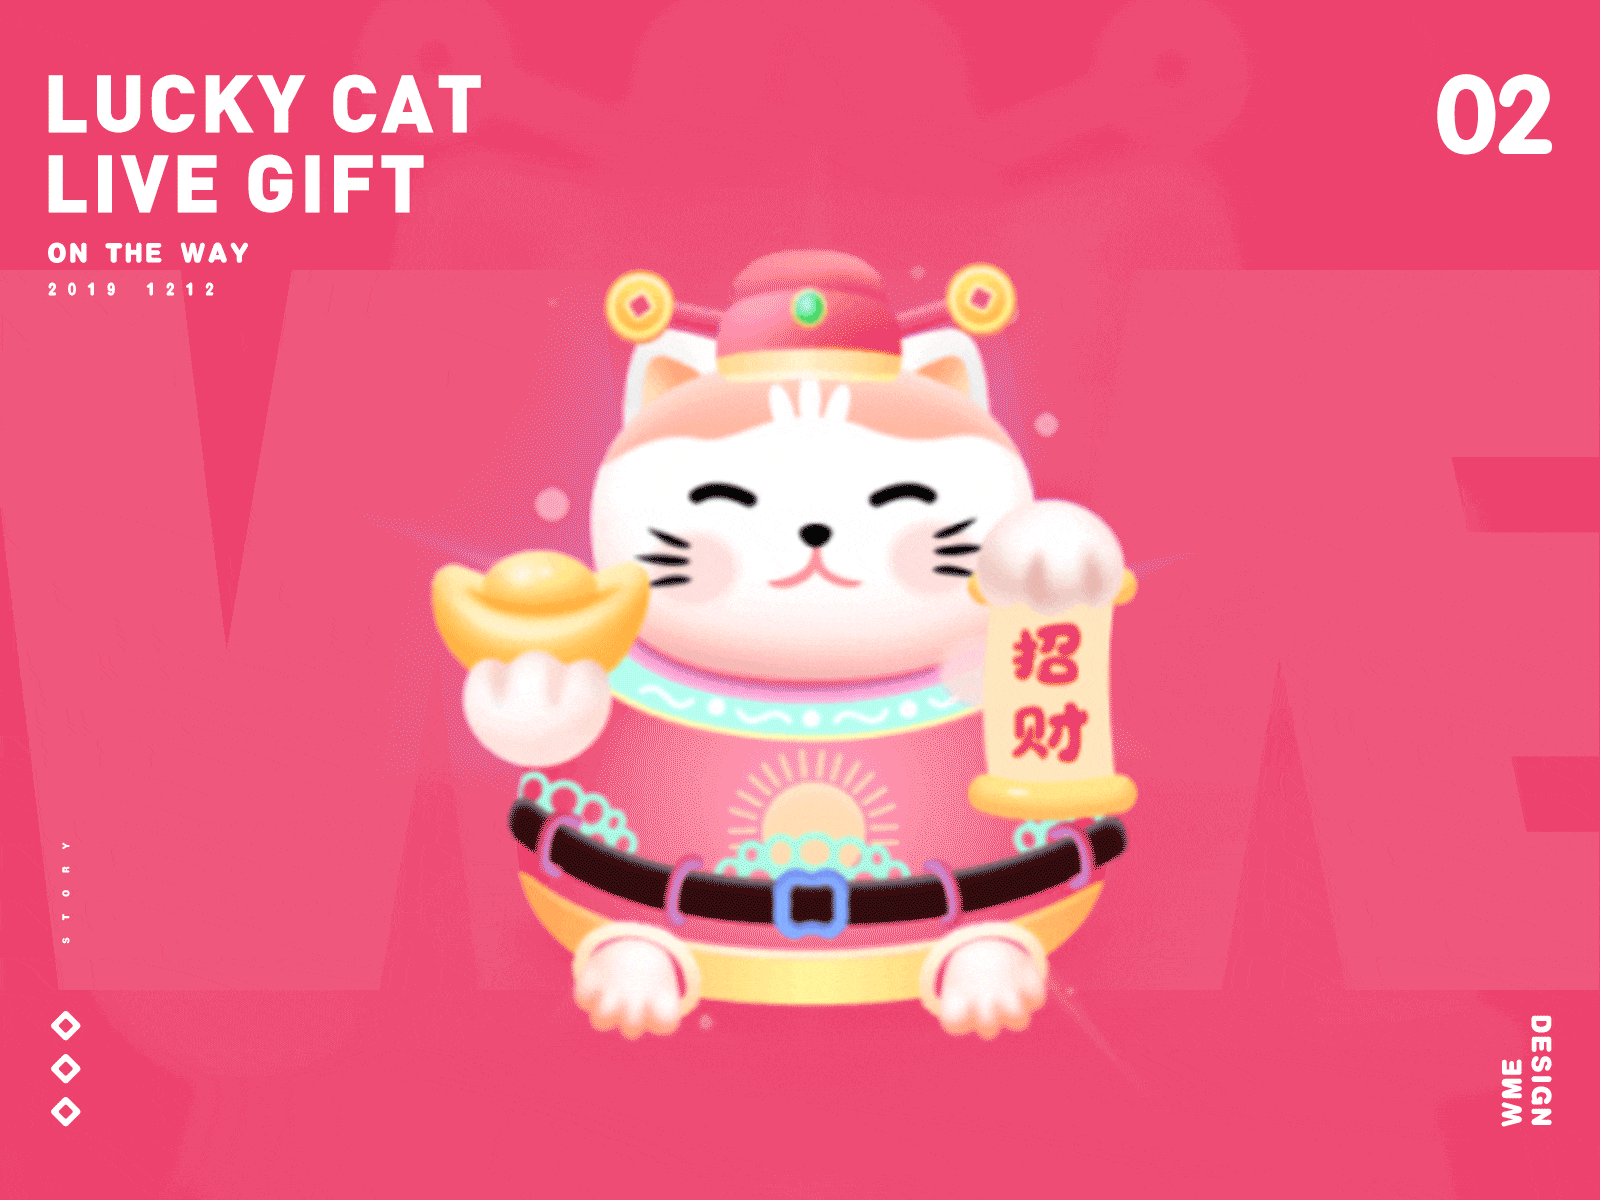 Lucky Cat 2 -Live gift by Wme on Dribbble